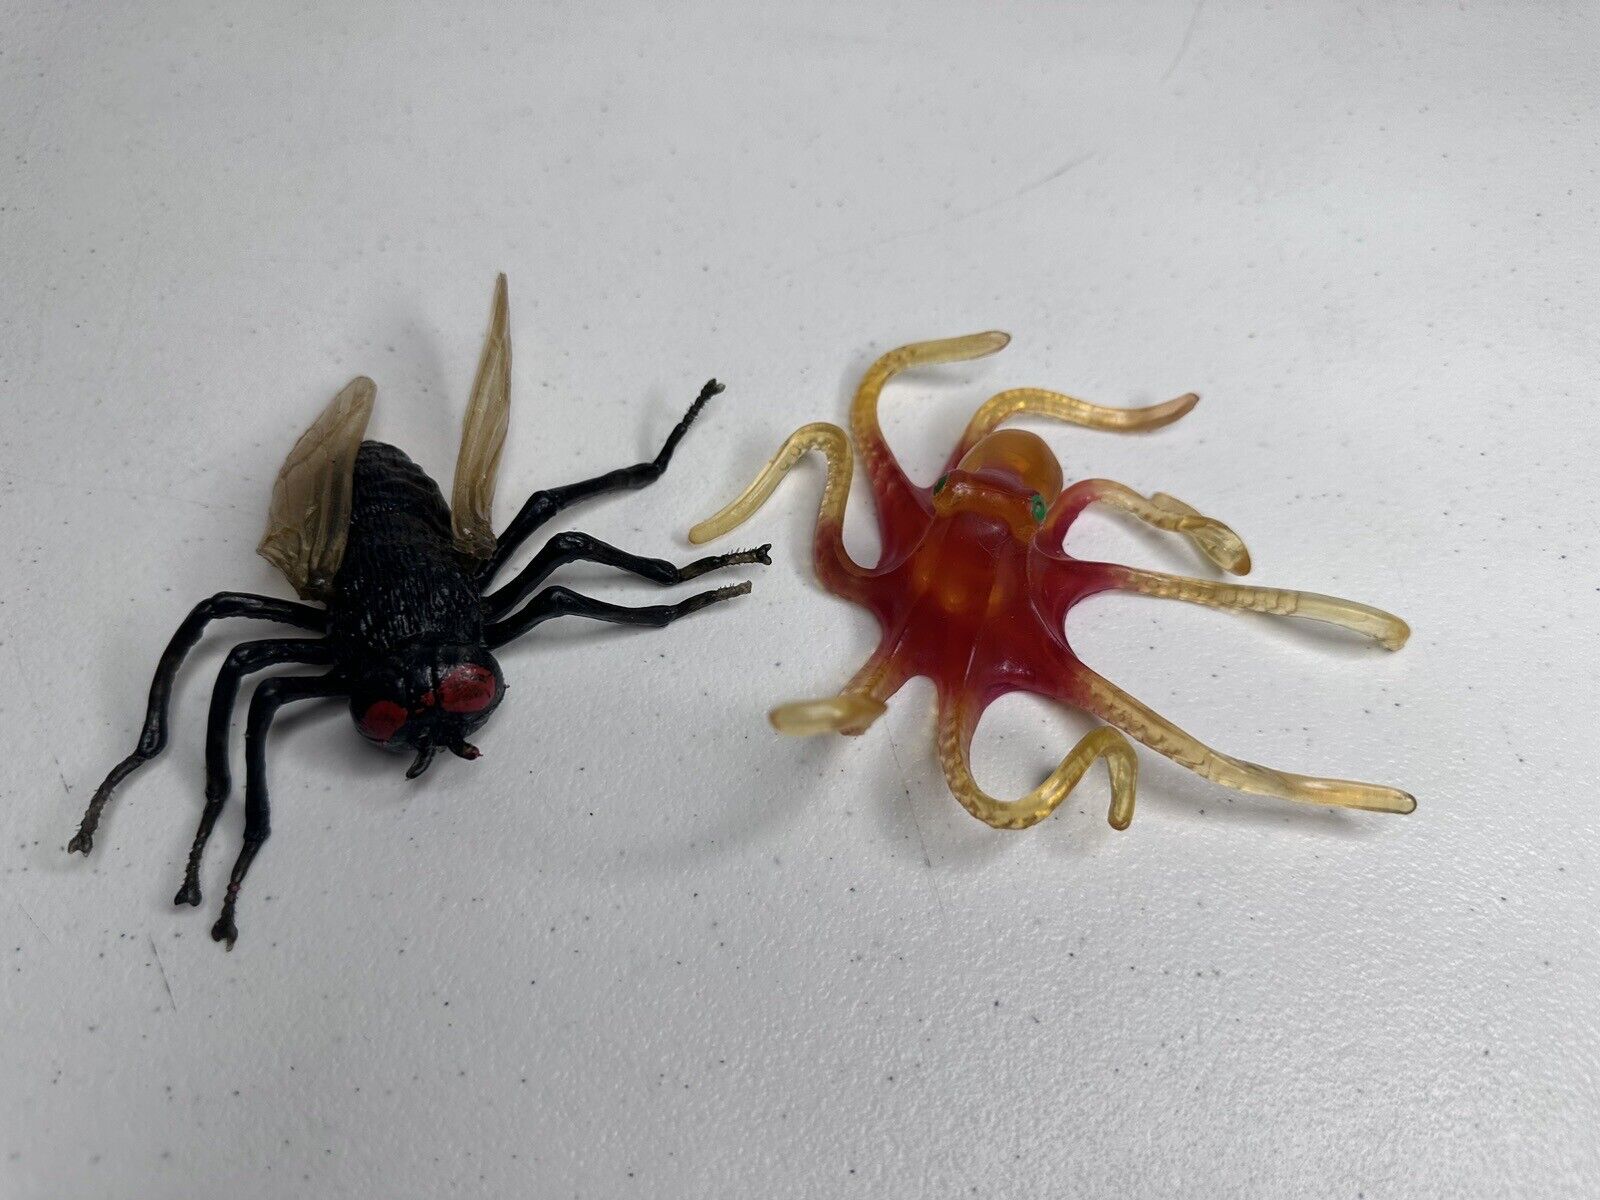 Vintage 1960s 70s Rubber Octopus & Fly Creatures - Rare Hong Kong Lot of 2 - TreasuTiques